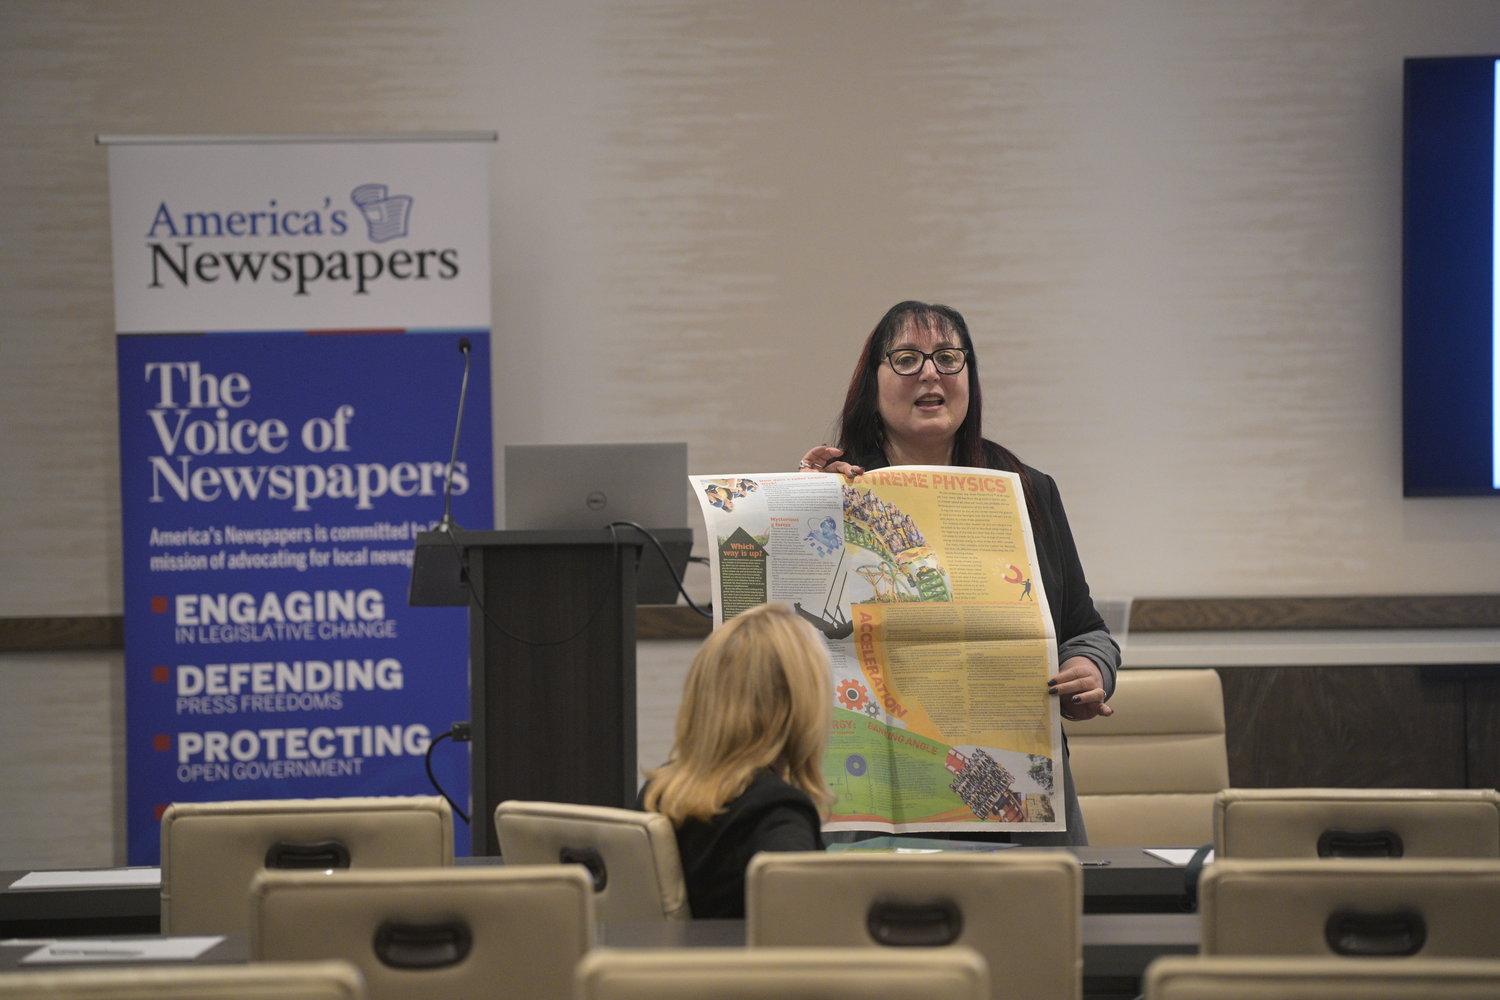 Jodi Pushkin, NIE manager of the Tampa Bay Times, on how NIE can help you grow audience. (Photo by Phelan M. Ebenhack)